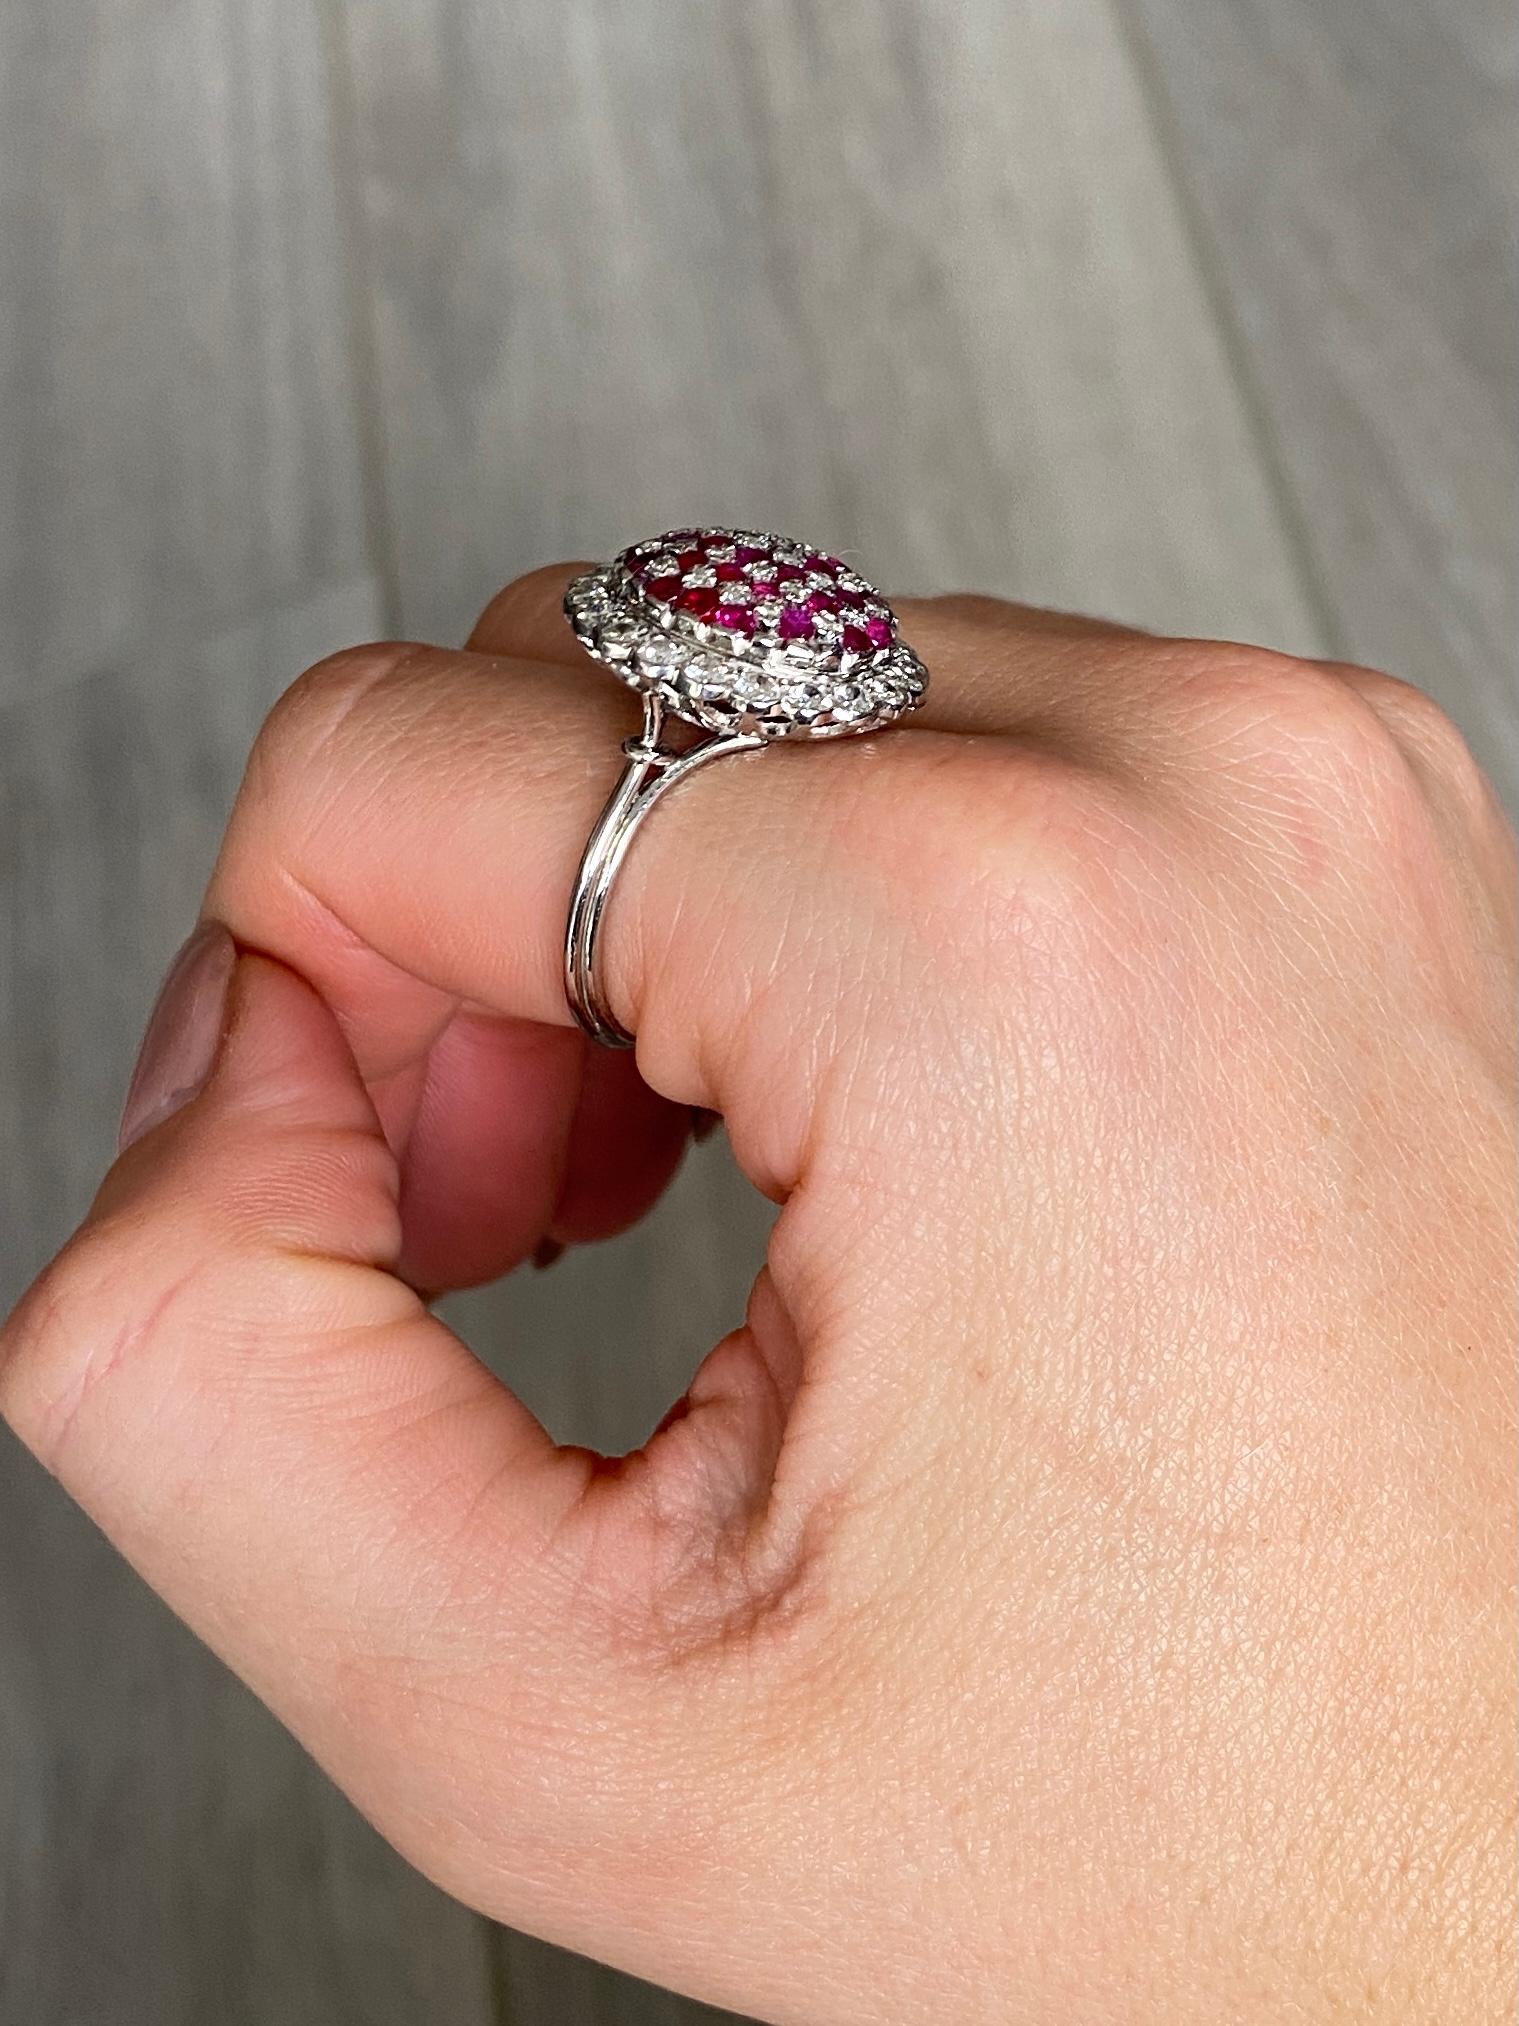 This gorgeous ring holds a total of approx 1ct of bright rubies and approx 1.2ct of round brilliant cut diamonds. Modelled in 18carat white gold. 

Ring Size: S or 9
Height From Finger: 9.5mm
Bombe Dimensions: 20x19mm 

Weight: 9.4g